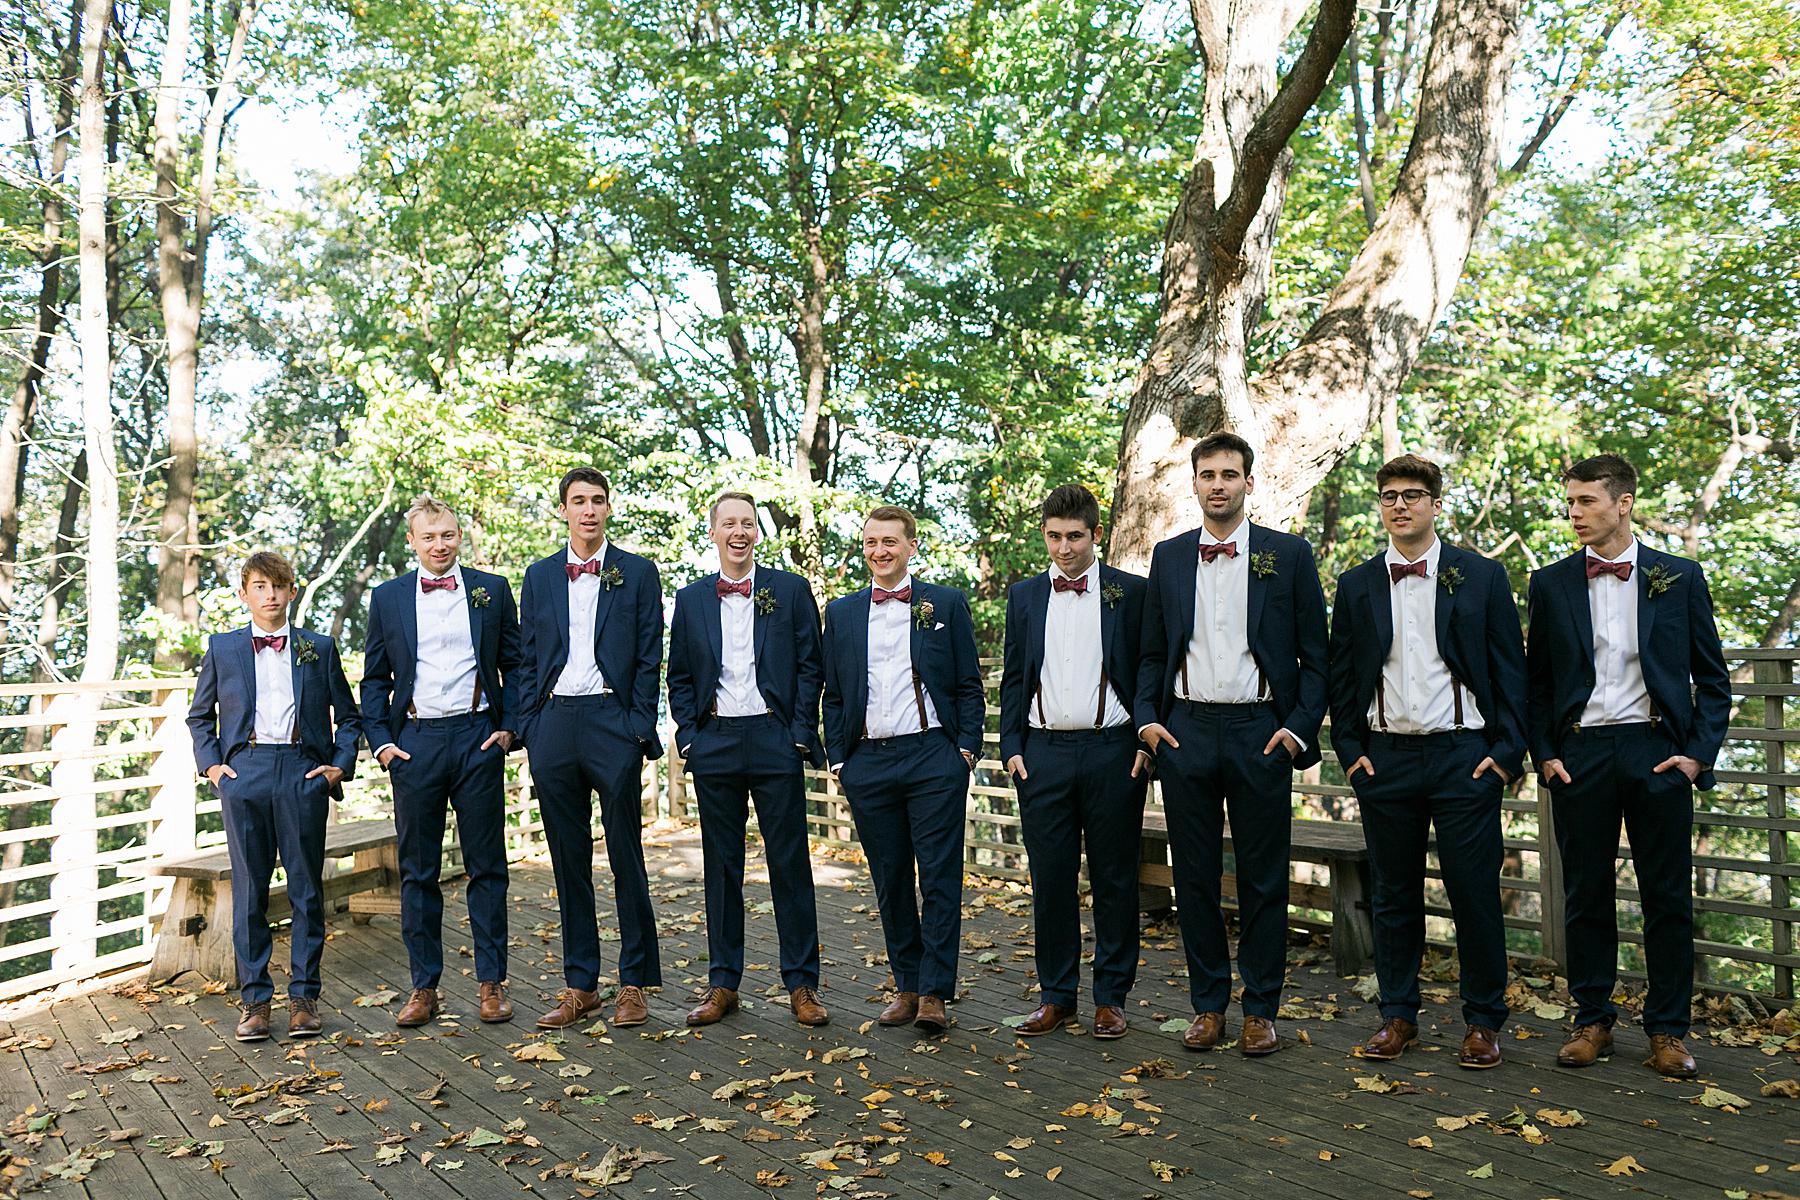 bridal party portraits fall autumn wedding with bridal party in mauve and navy blue